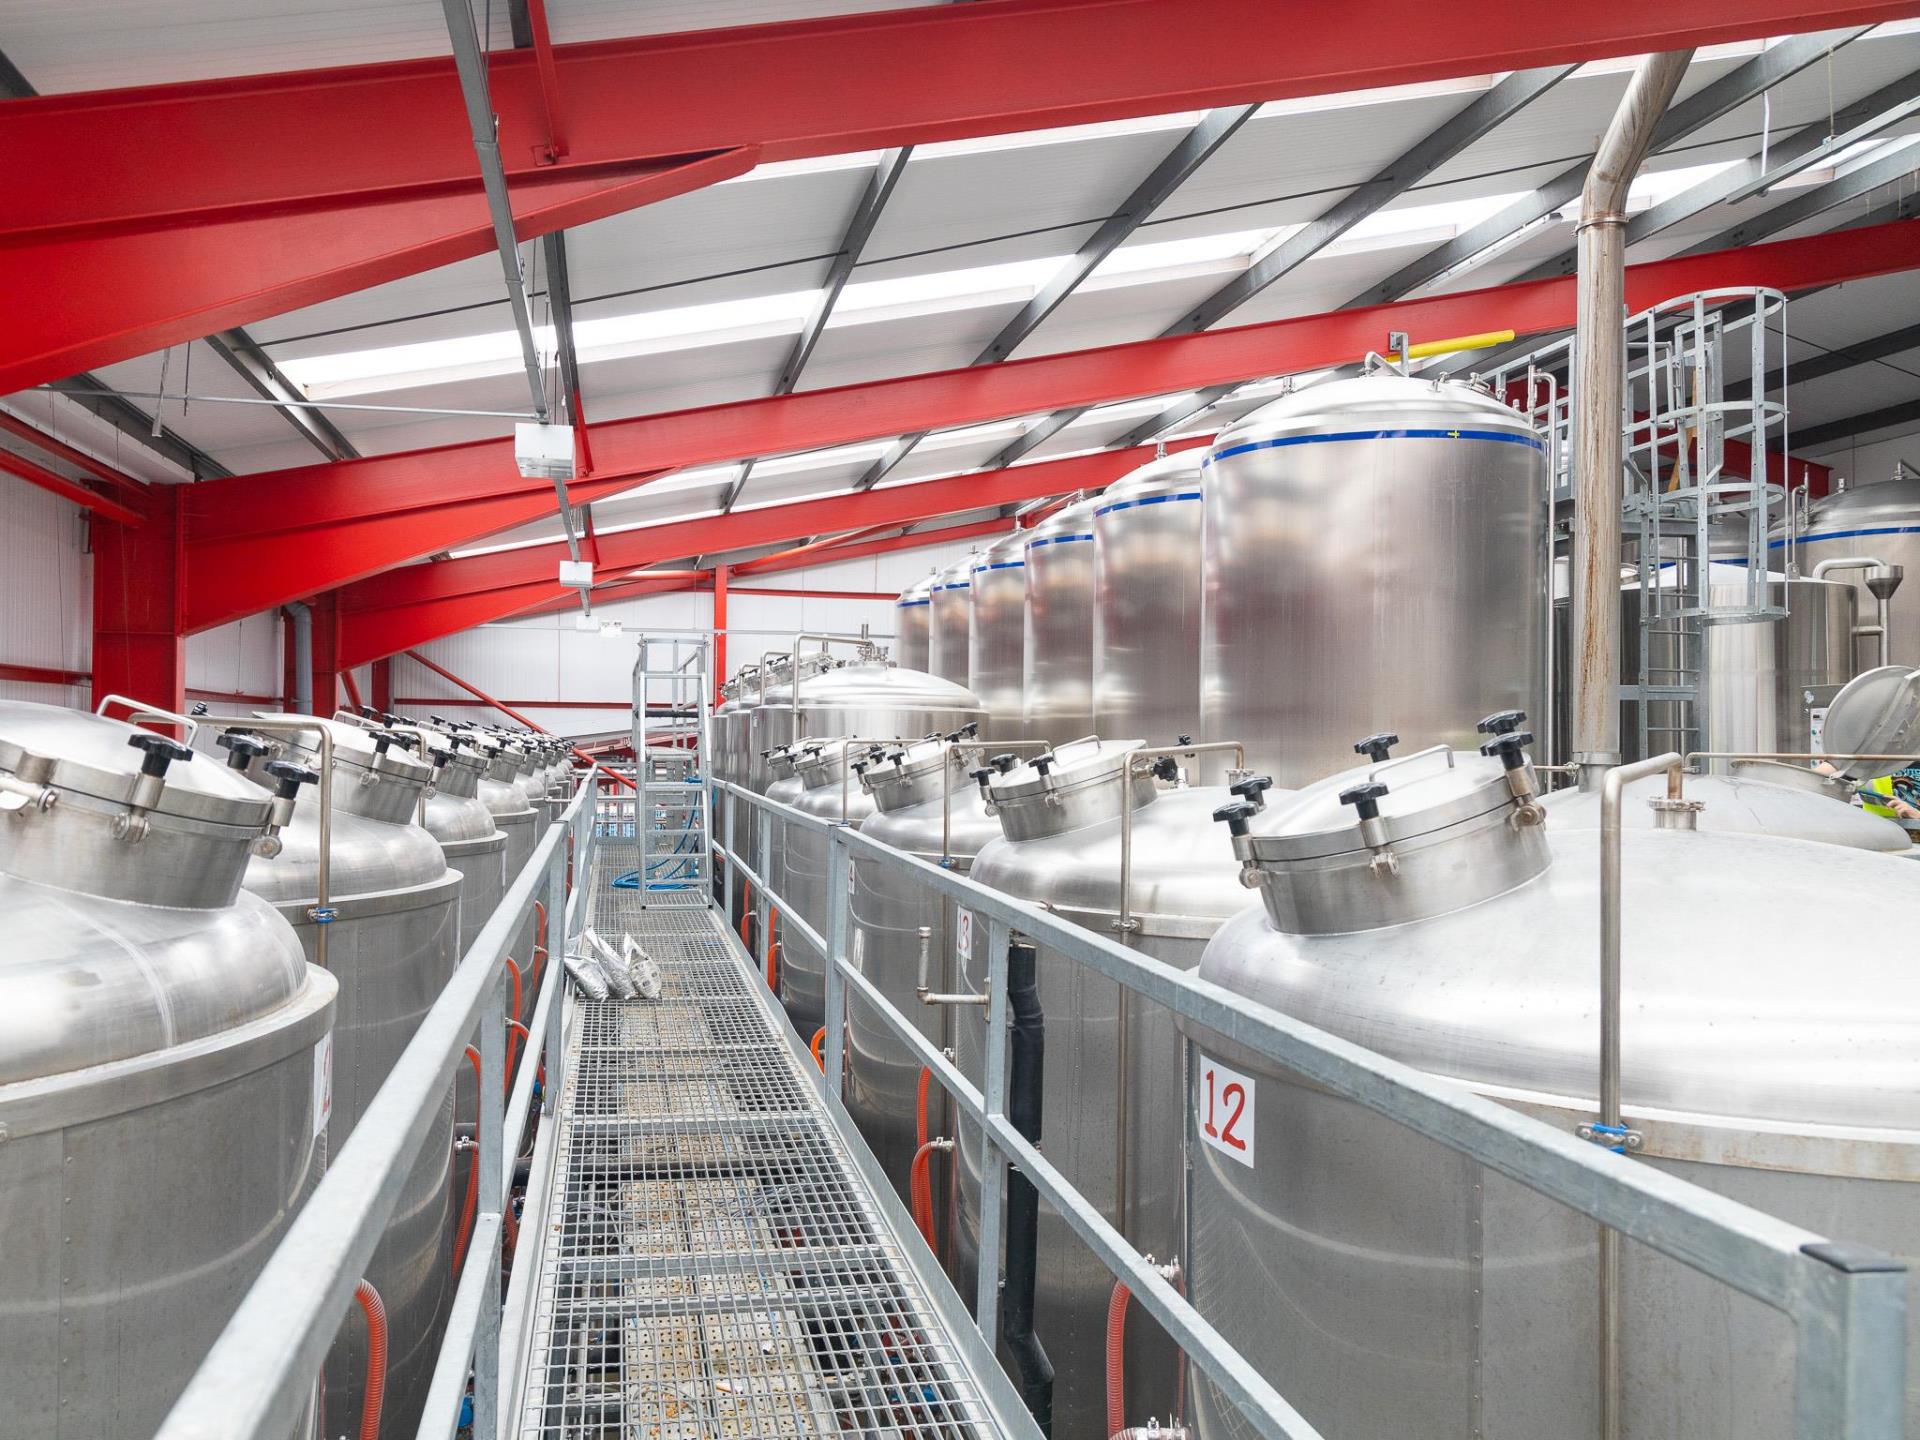 Inside the Tiny Rebel brewery.